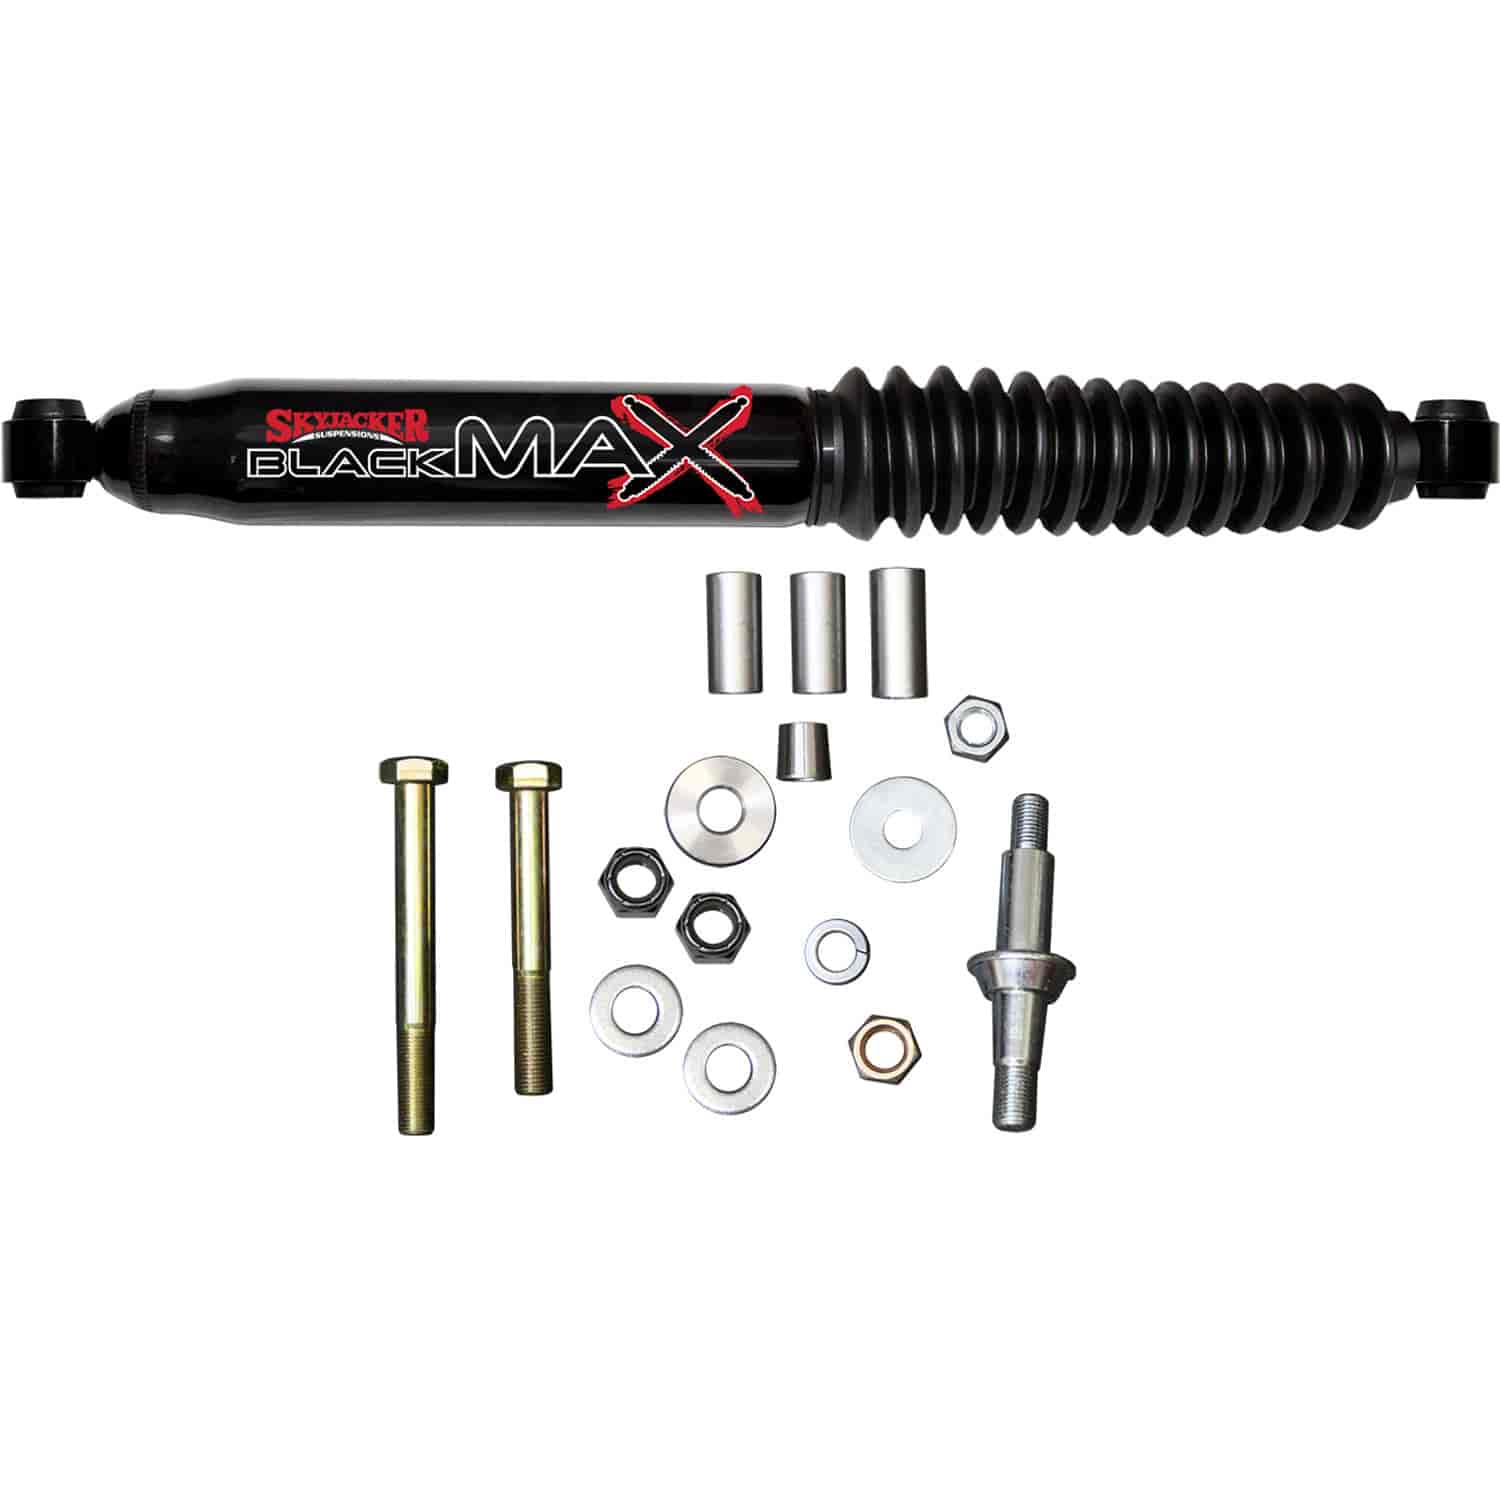 Black MAX Stabilizer 1998-2001 for Dodge 1/2, 1998-2002 for Dodge 3/4, 1 Ton Ram 4WD